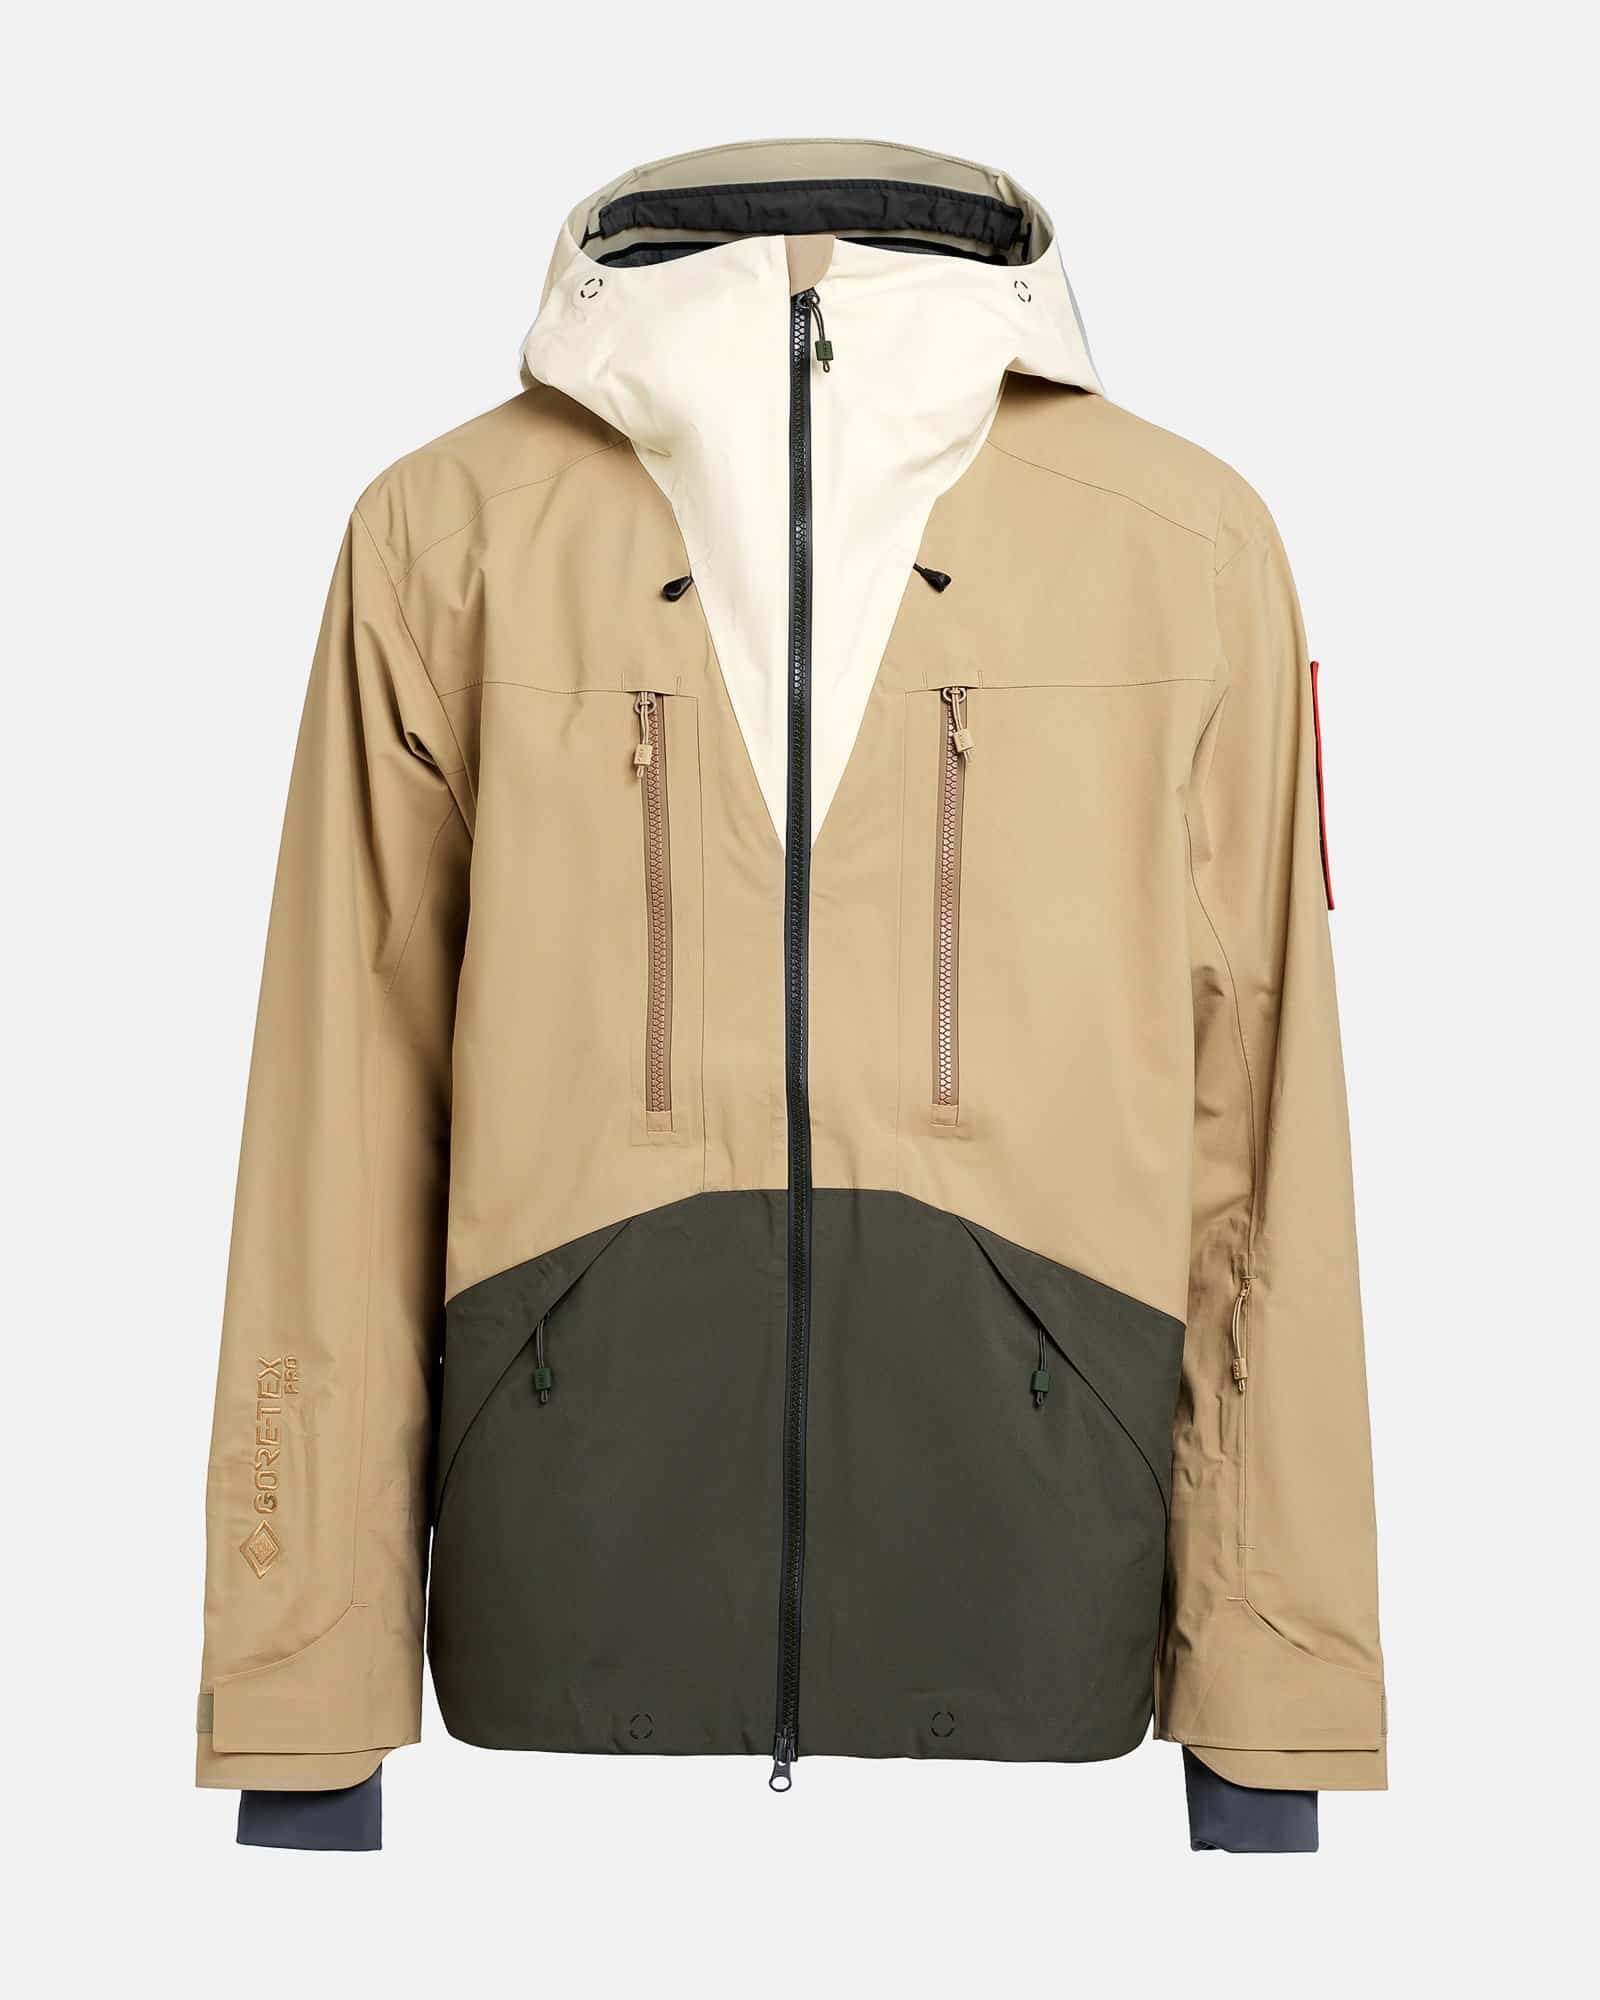 gore tex pro 3l shell jacket Z 2 HD CASTLE WALL SAND FOREST GREEN SHELL JACKETS the mountain studio 01